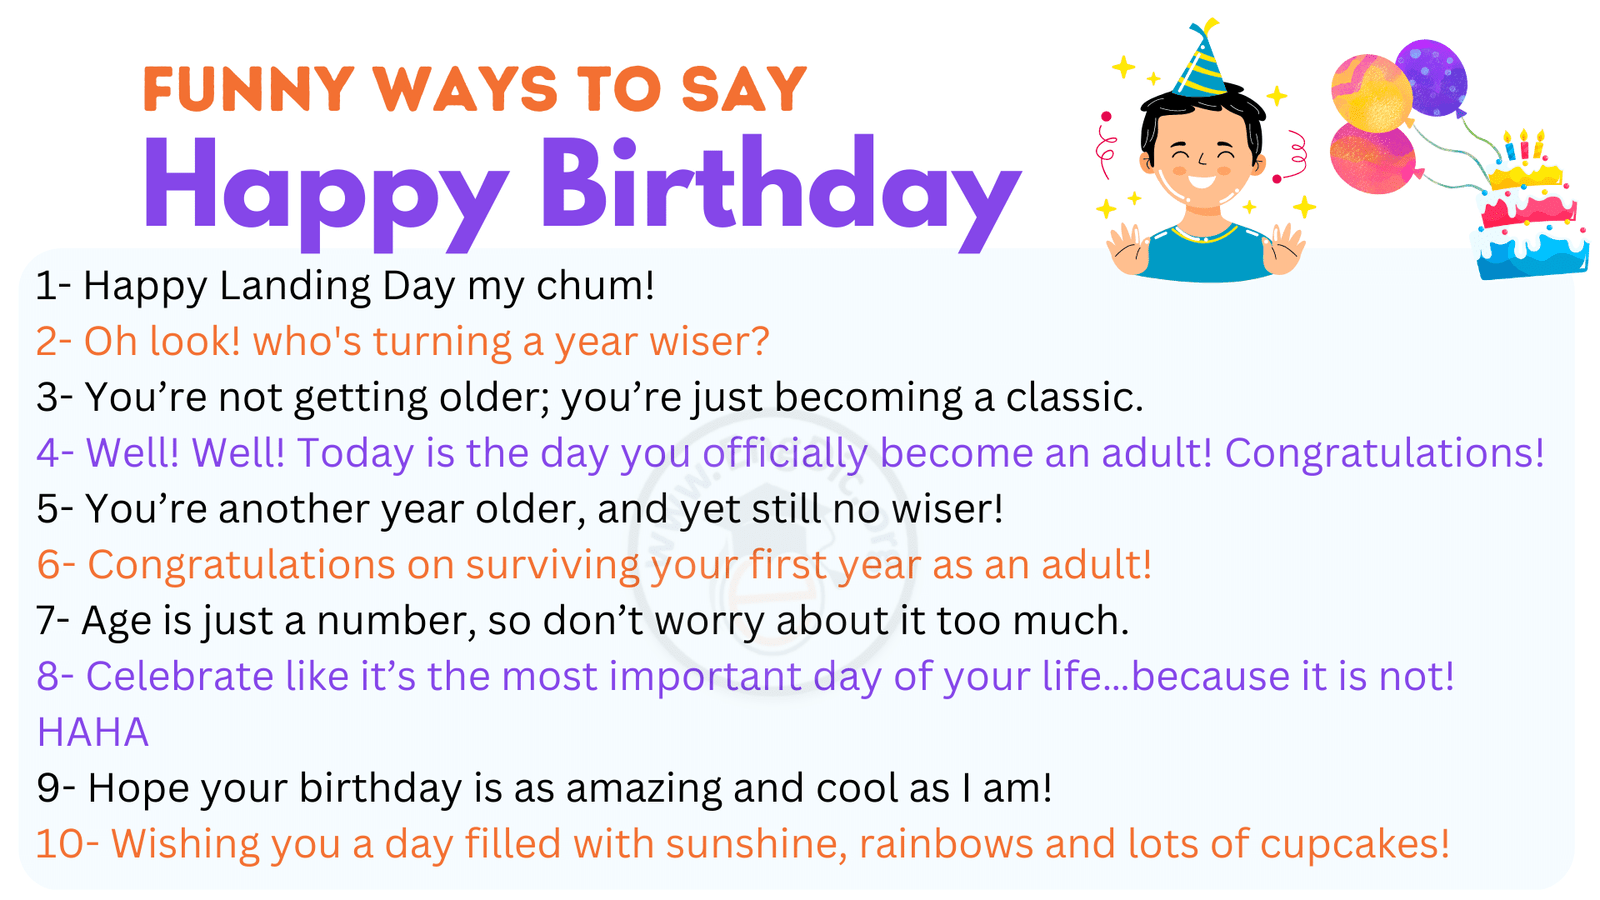 50 Most Funny Ways To Say Happy Birthday To Friend – EngDic